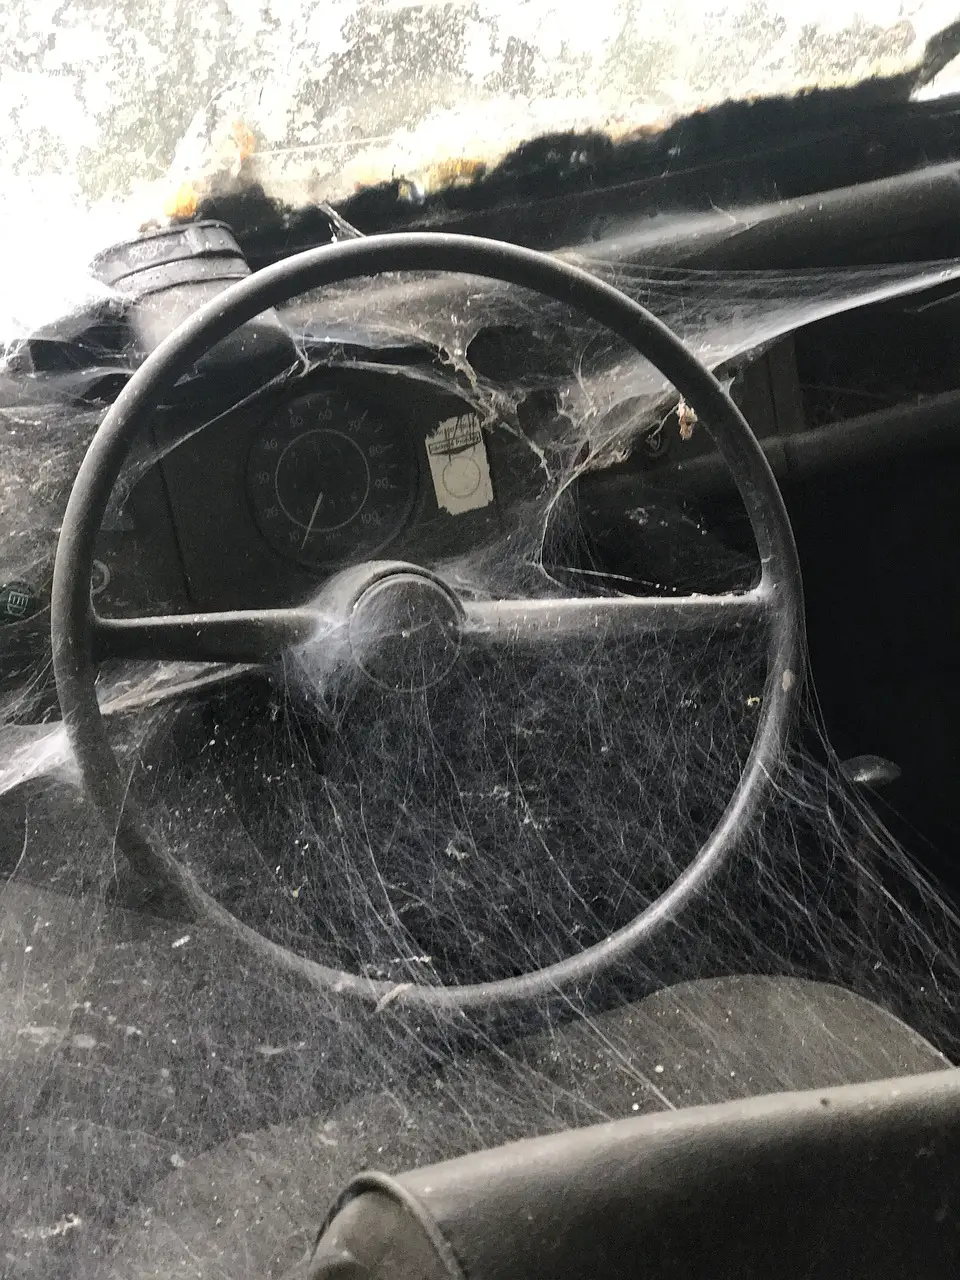 how to get rid of spiders in car